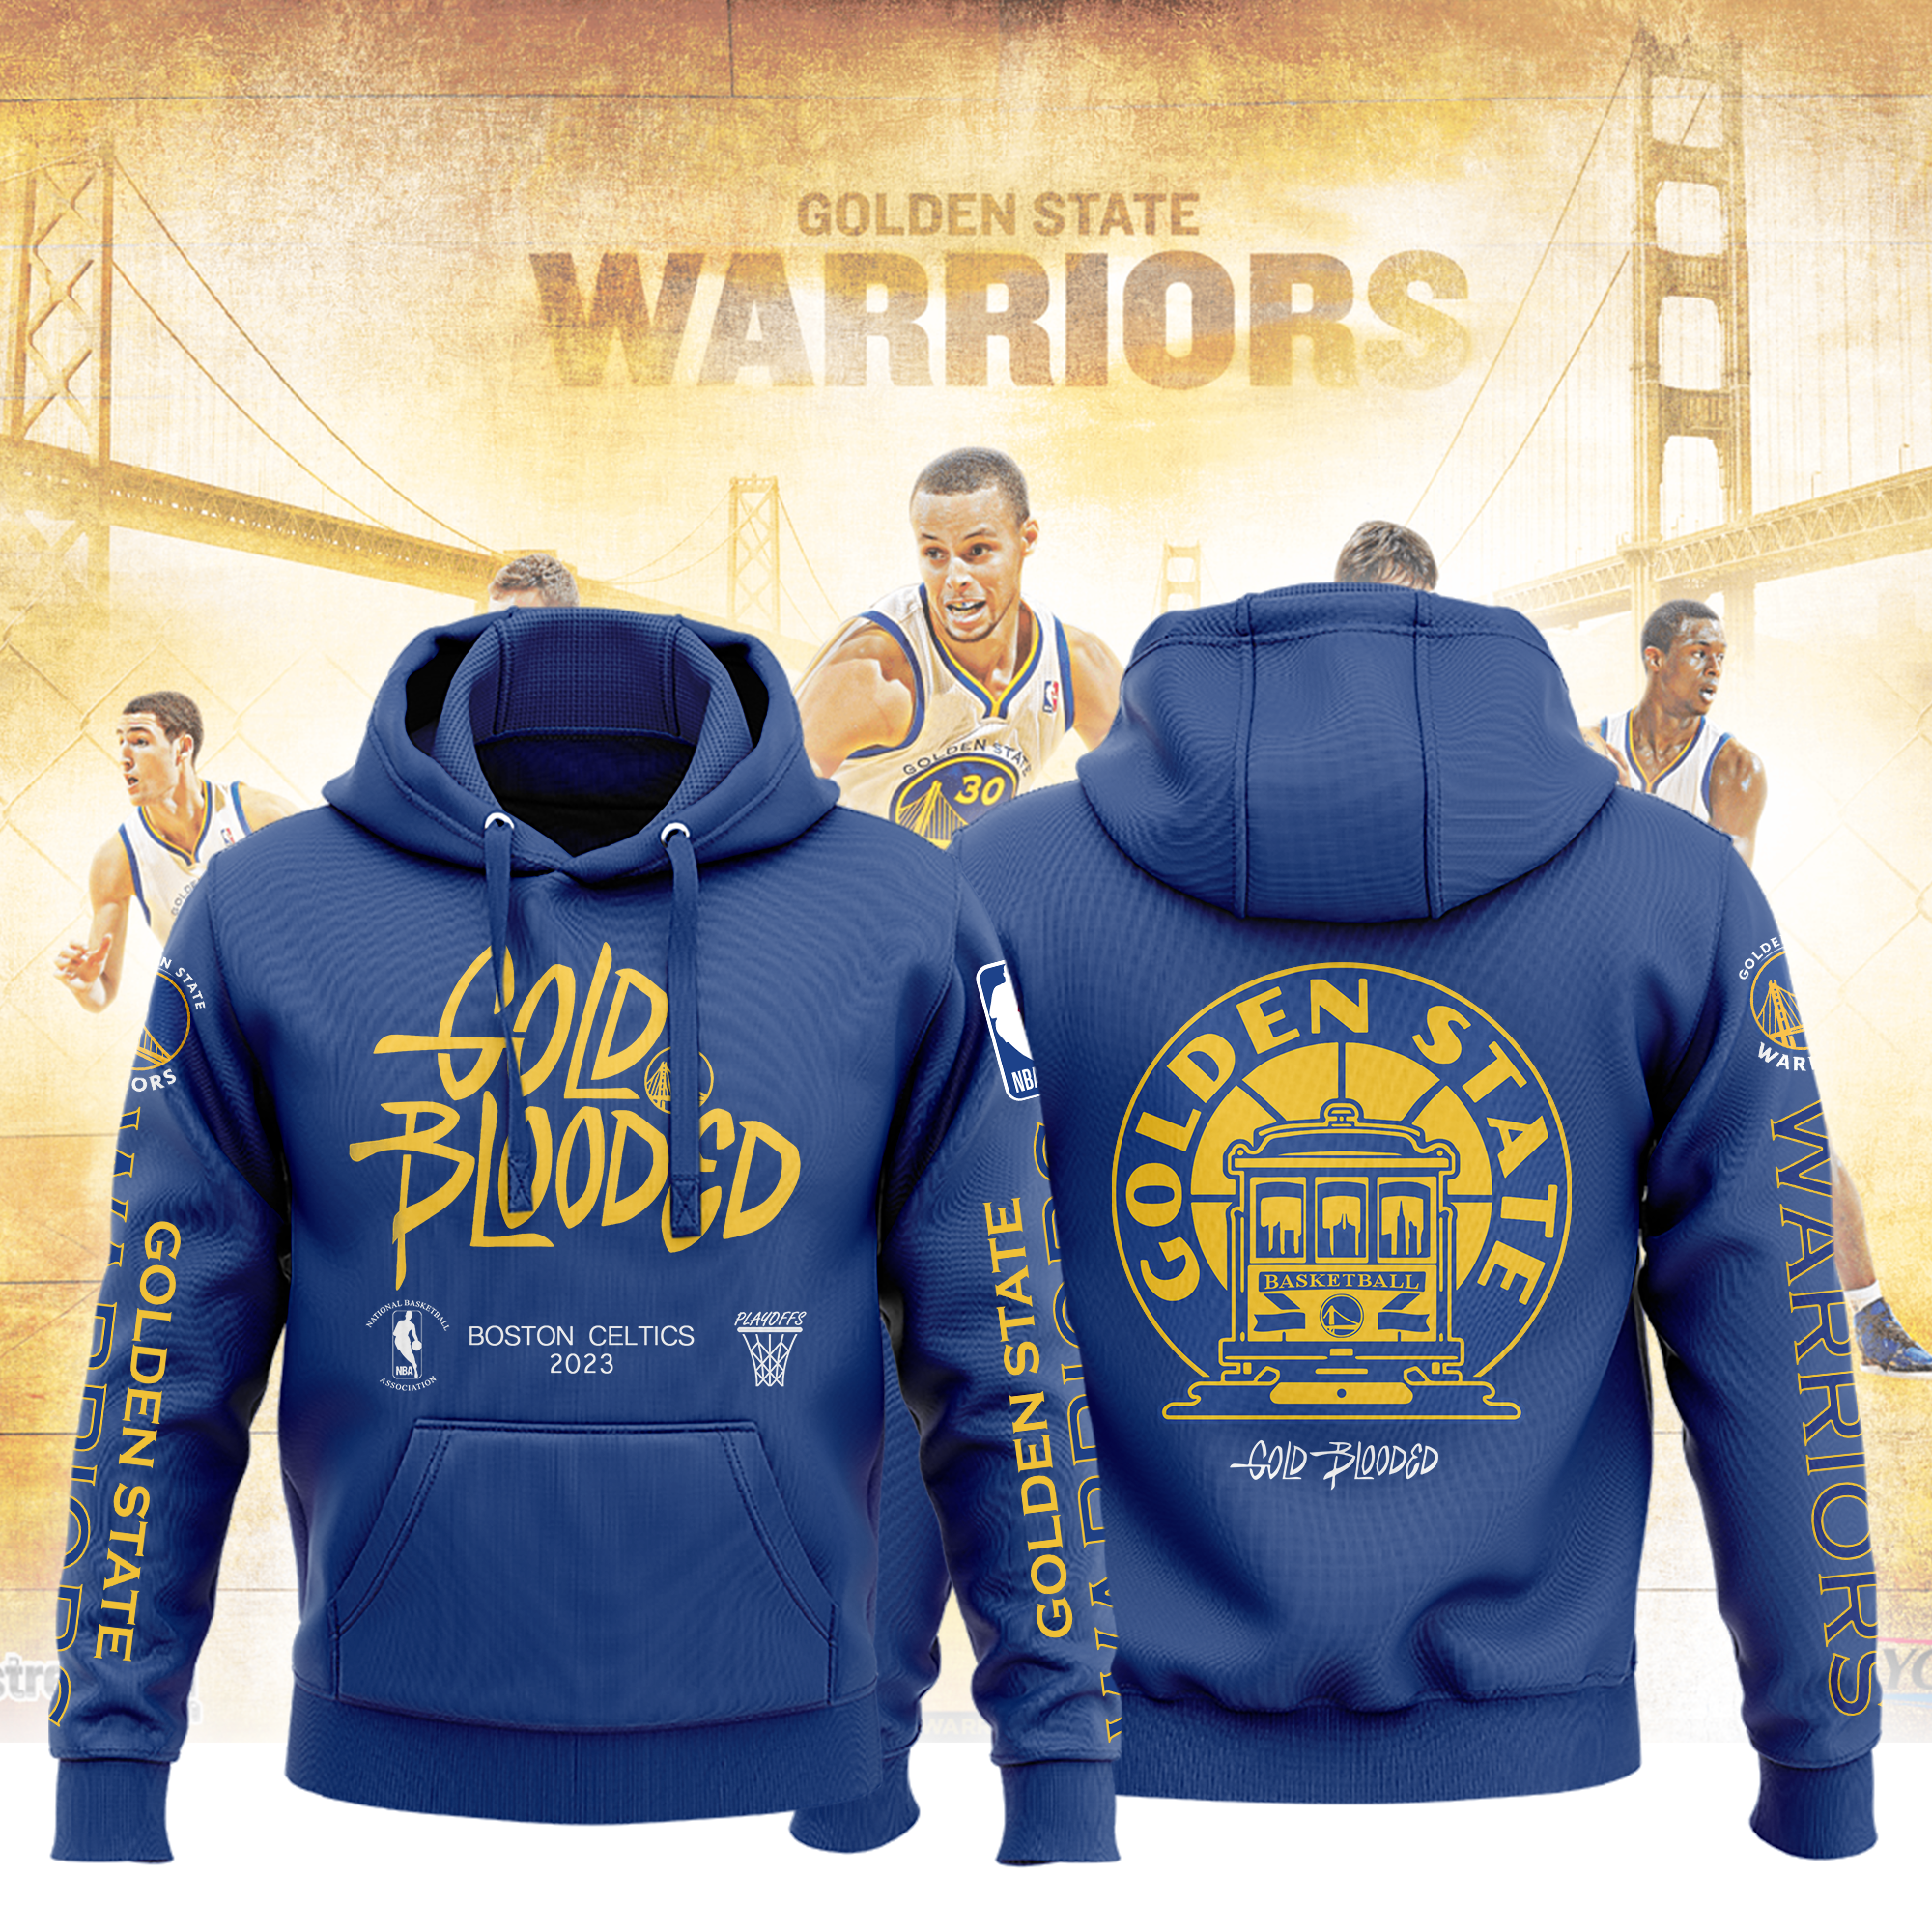 Nike Golden State Warriors Gold Blooded 2023 Nba Playoff T-Shirt, hoodie,  sweater, long sleeve and tank top